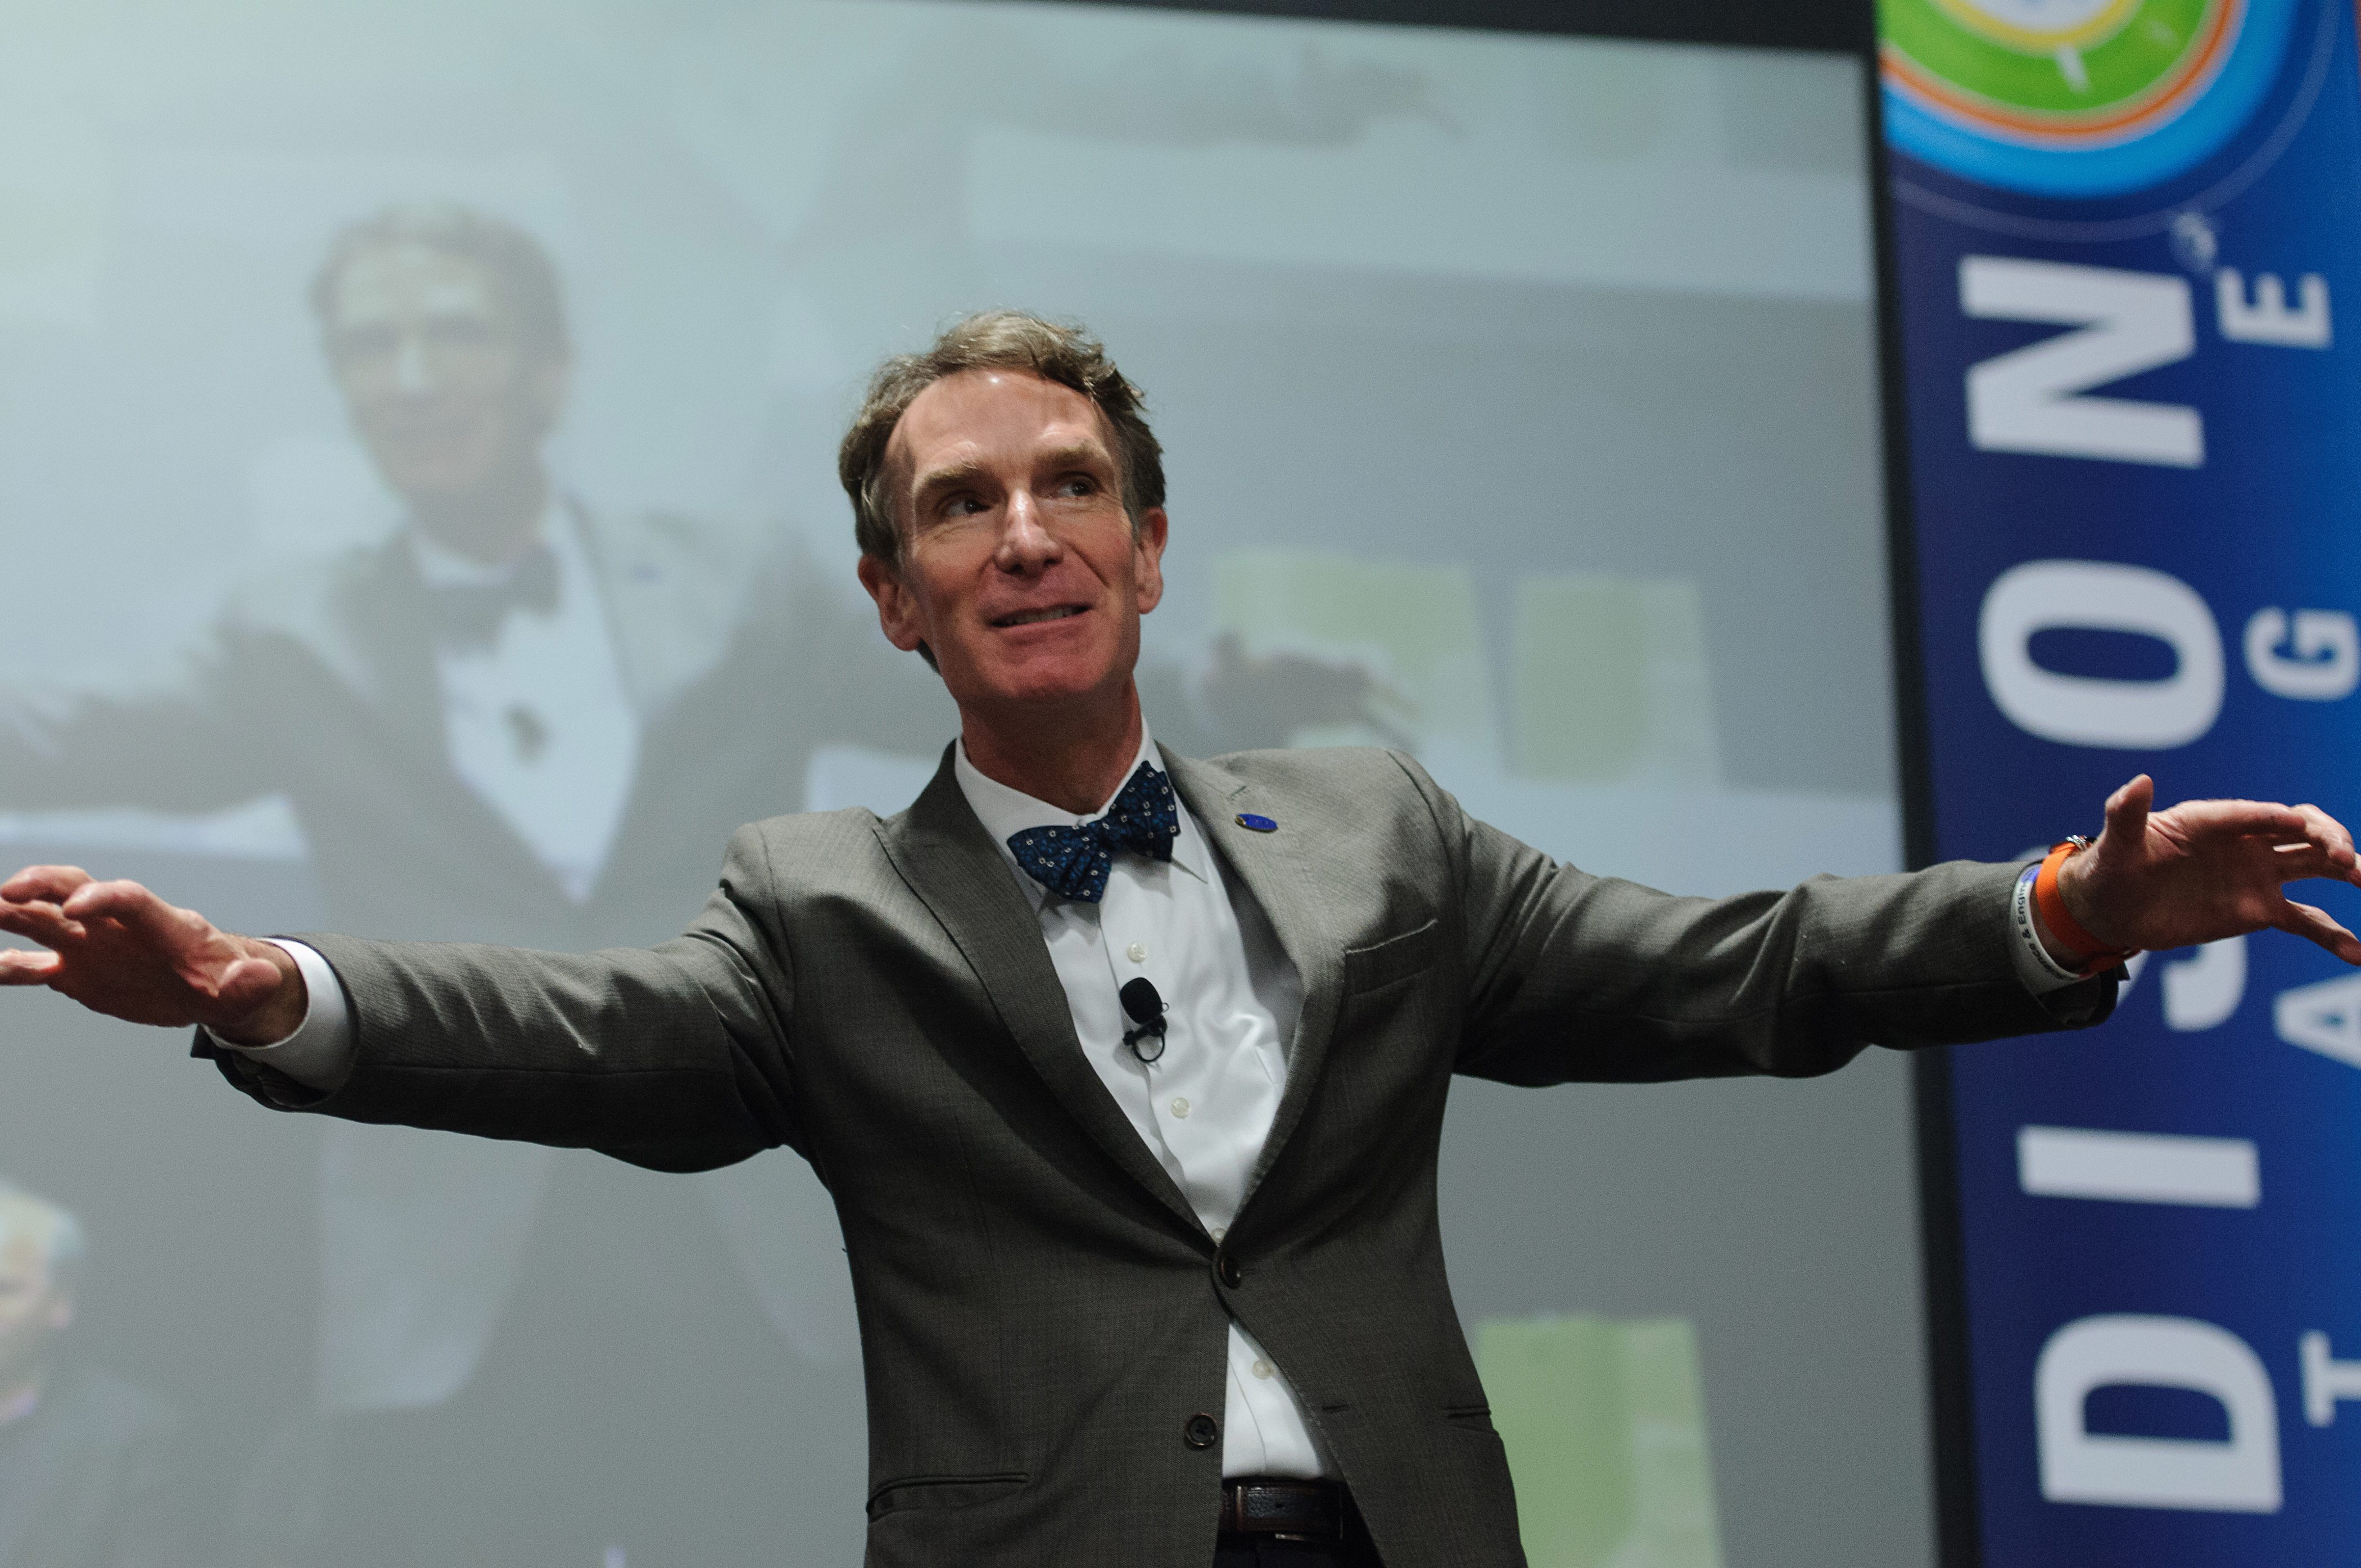 Bill Nye Open To Criminal Charges Jail Time For Climate Change Dissenters Washington Times - bill nye the science guy song roblox